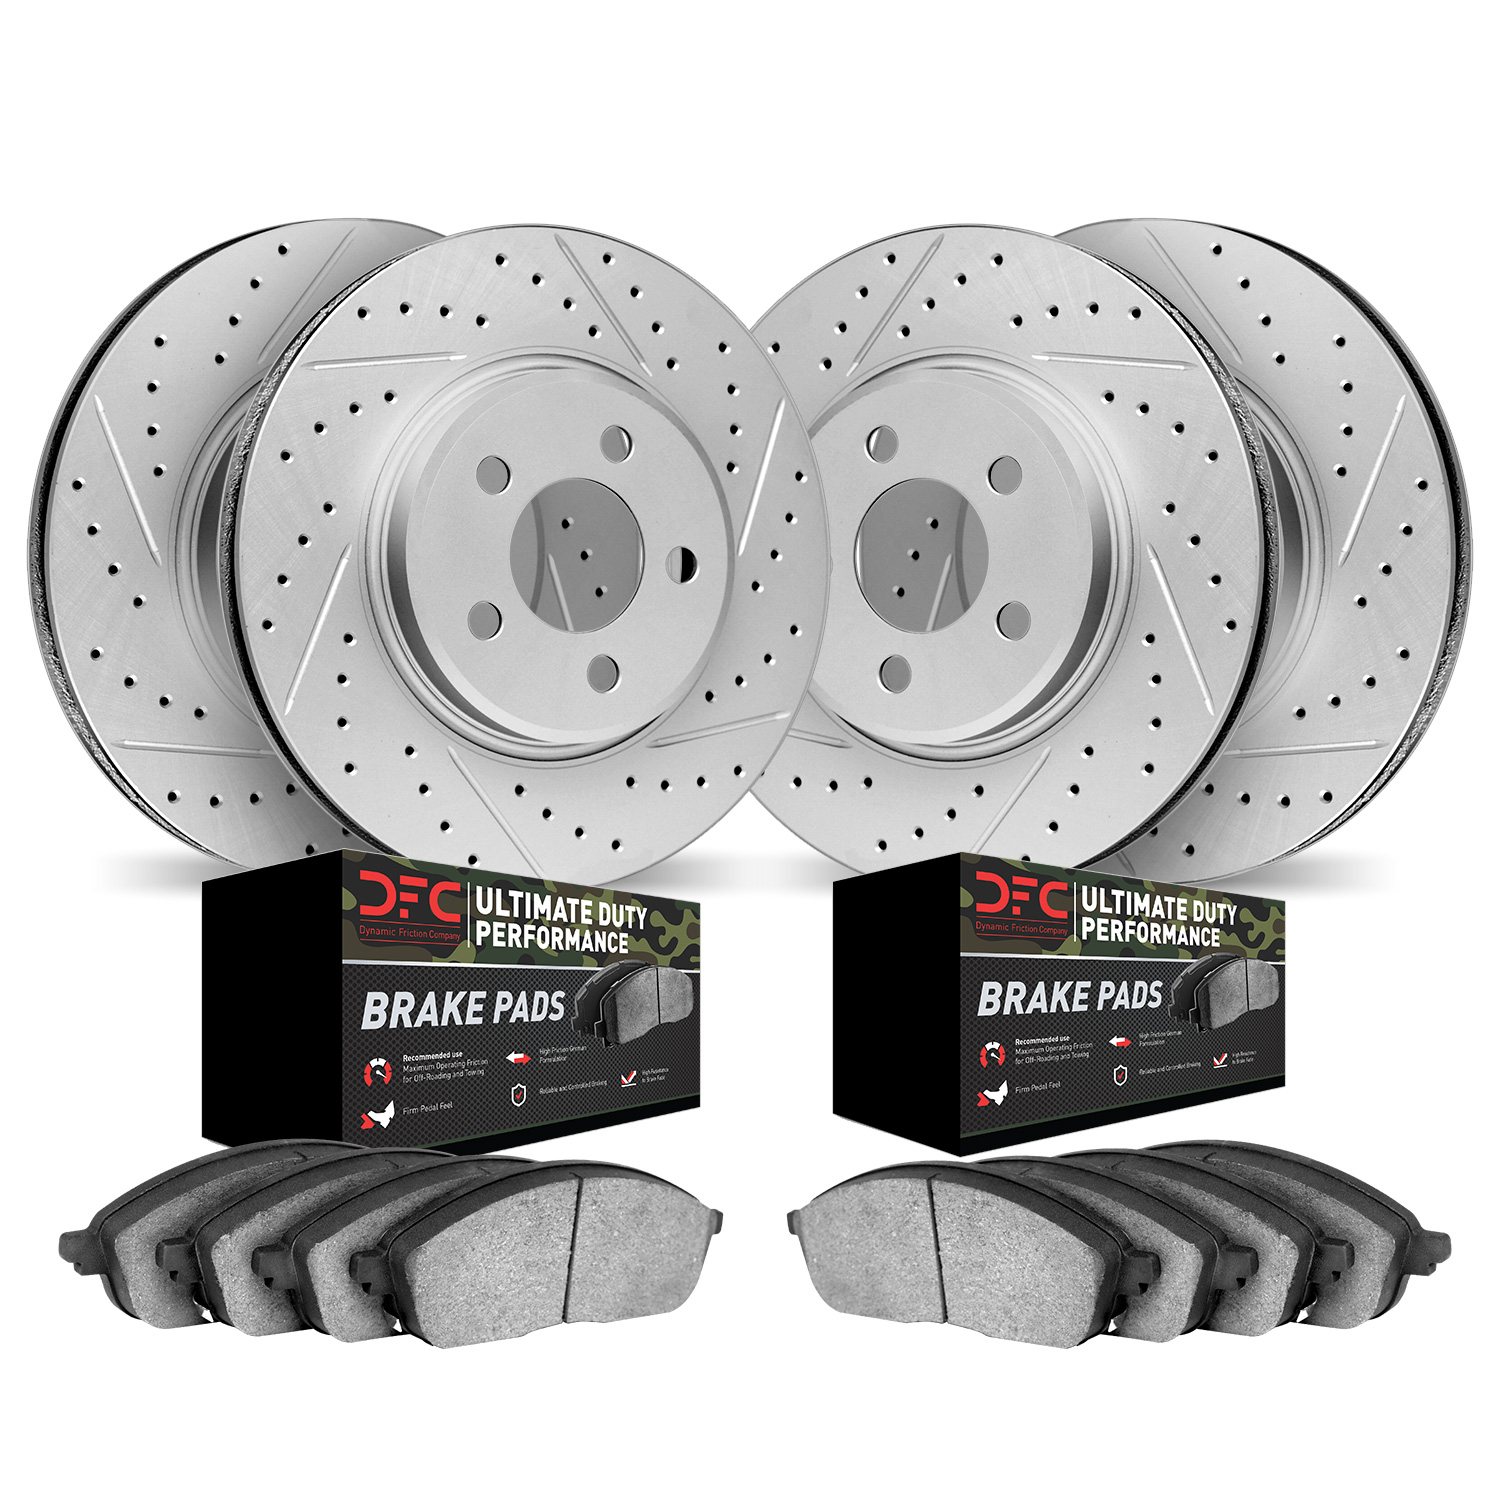 2404-40003 Geoperformance Drilled/Slotted Brake Rotors with Ultimate-Duty Brake Pads Kit, 2008-2012 Mopar, Position: Front and R